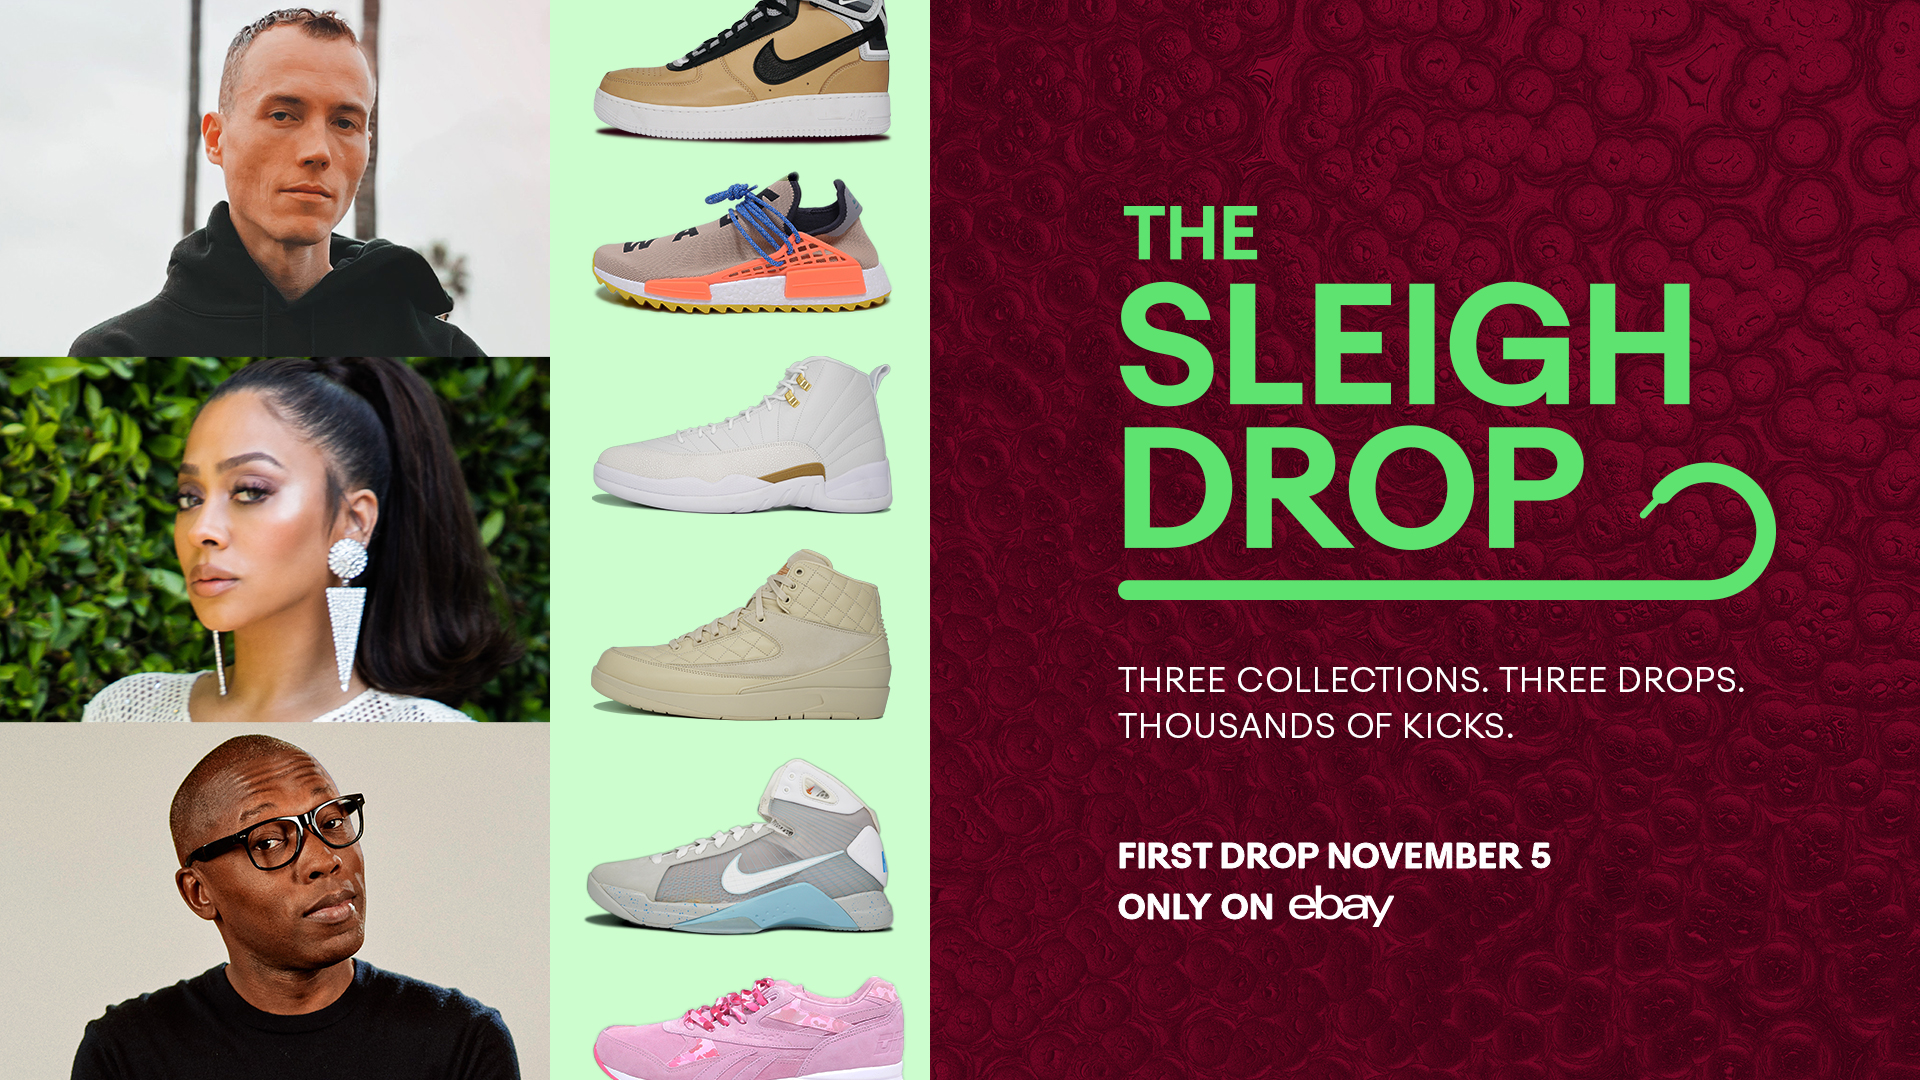 eBay Launches "The Sleigh Drop" Sneaker Sale Event